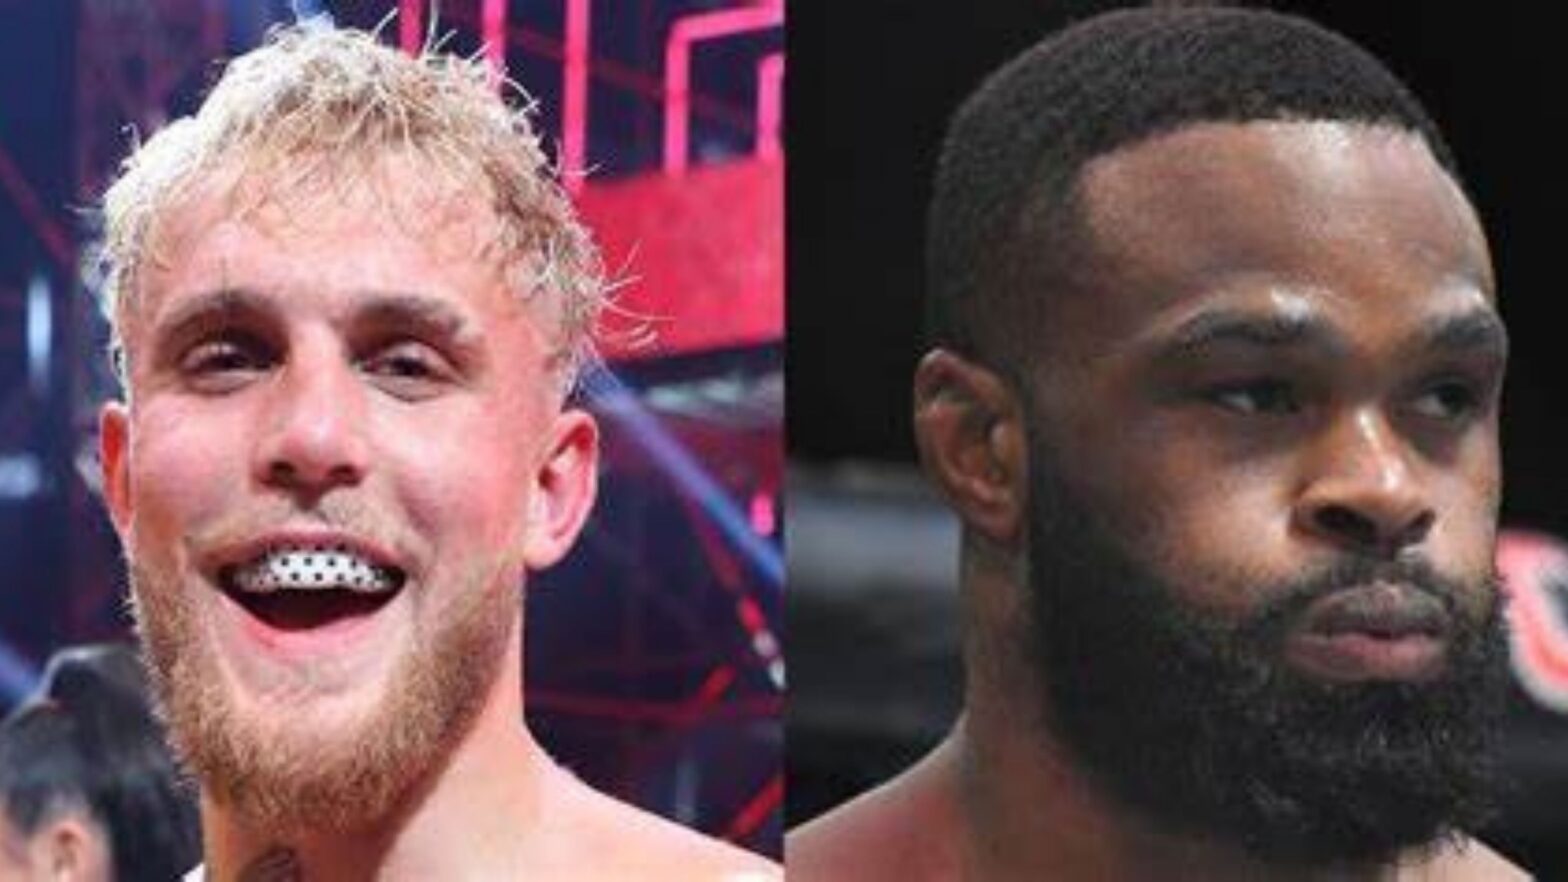 Viewers Claim Jake Paul vs Tyron Woodley 2 Was Rigged After Video Shows Paul Twisting His Right Glove In KO Gesture 